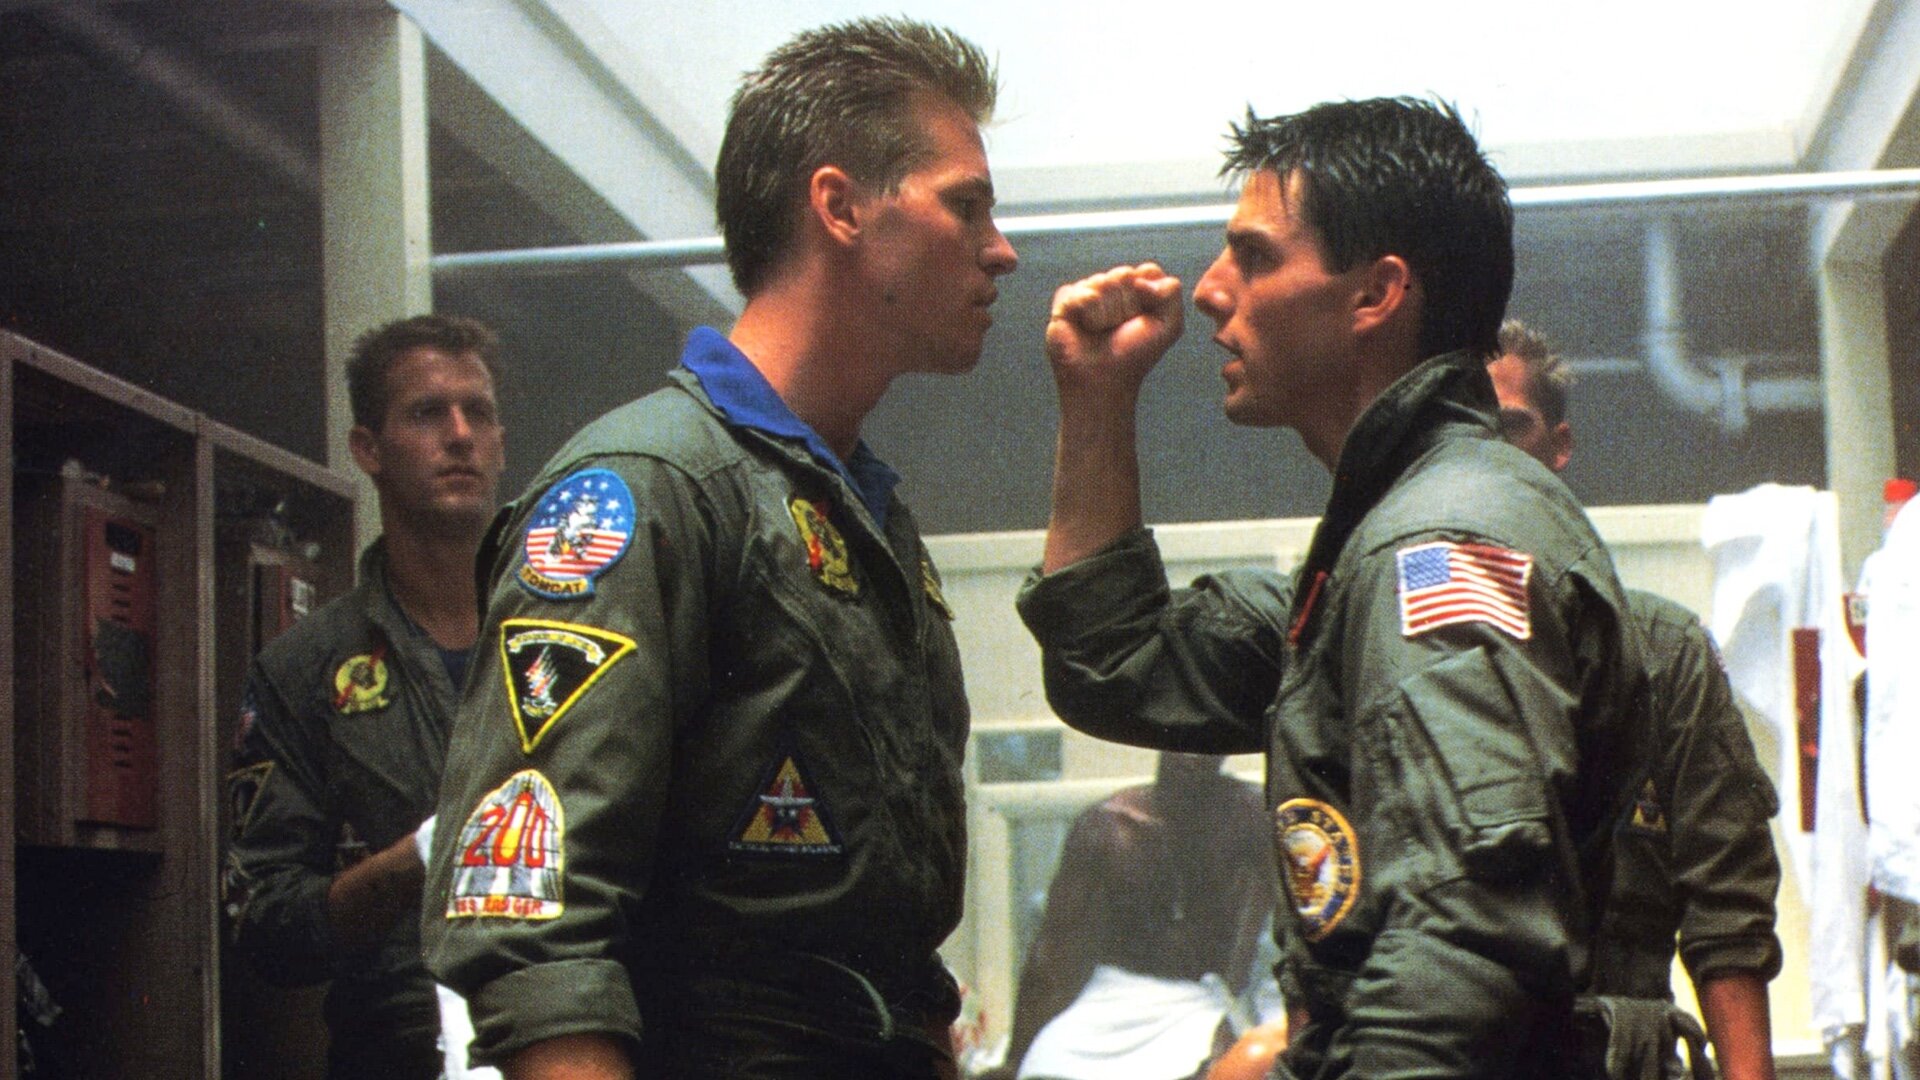 val-kilmer-begged-to-be-in-top-gun-maverick-and-he-shares-a-prank-he-played-on-tom-cruise-social.jpg